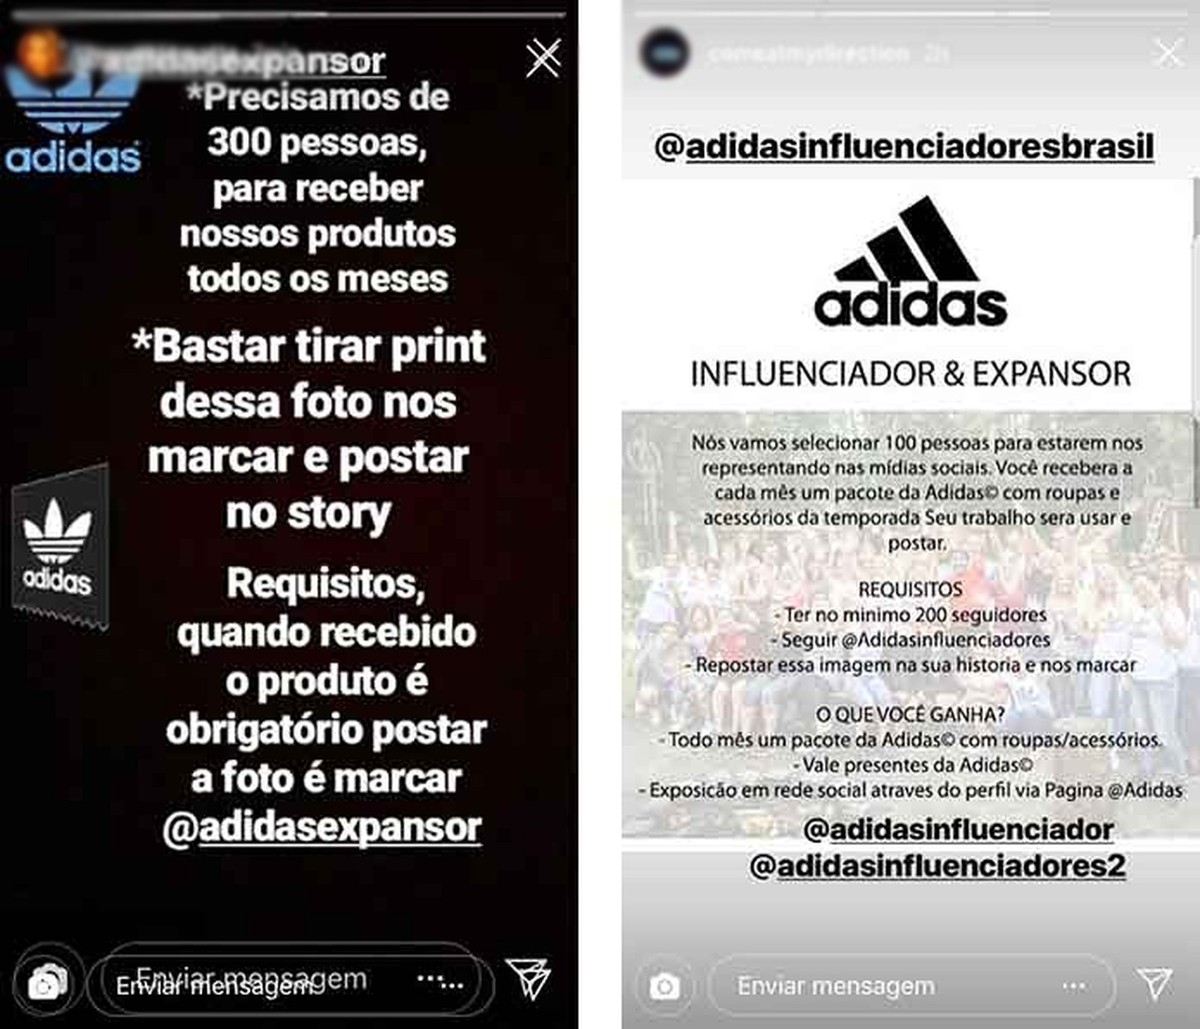 Adidas influencer: fake promotion circulates on social networks